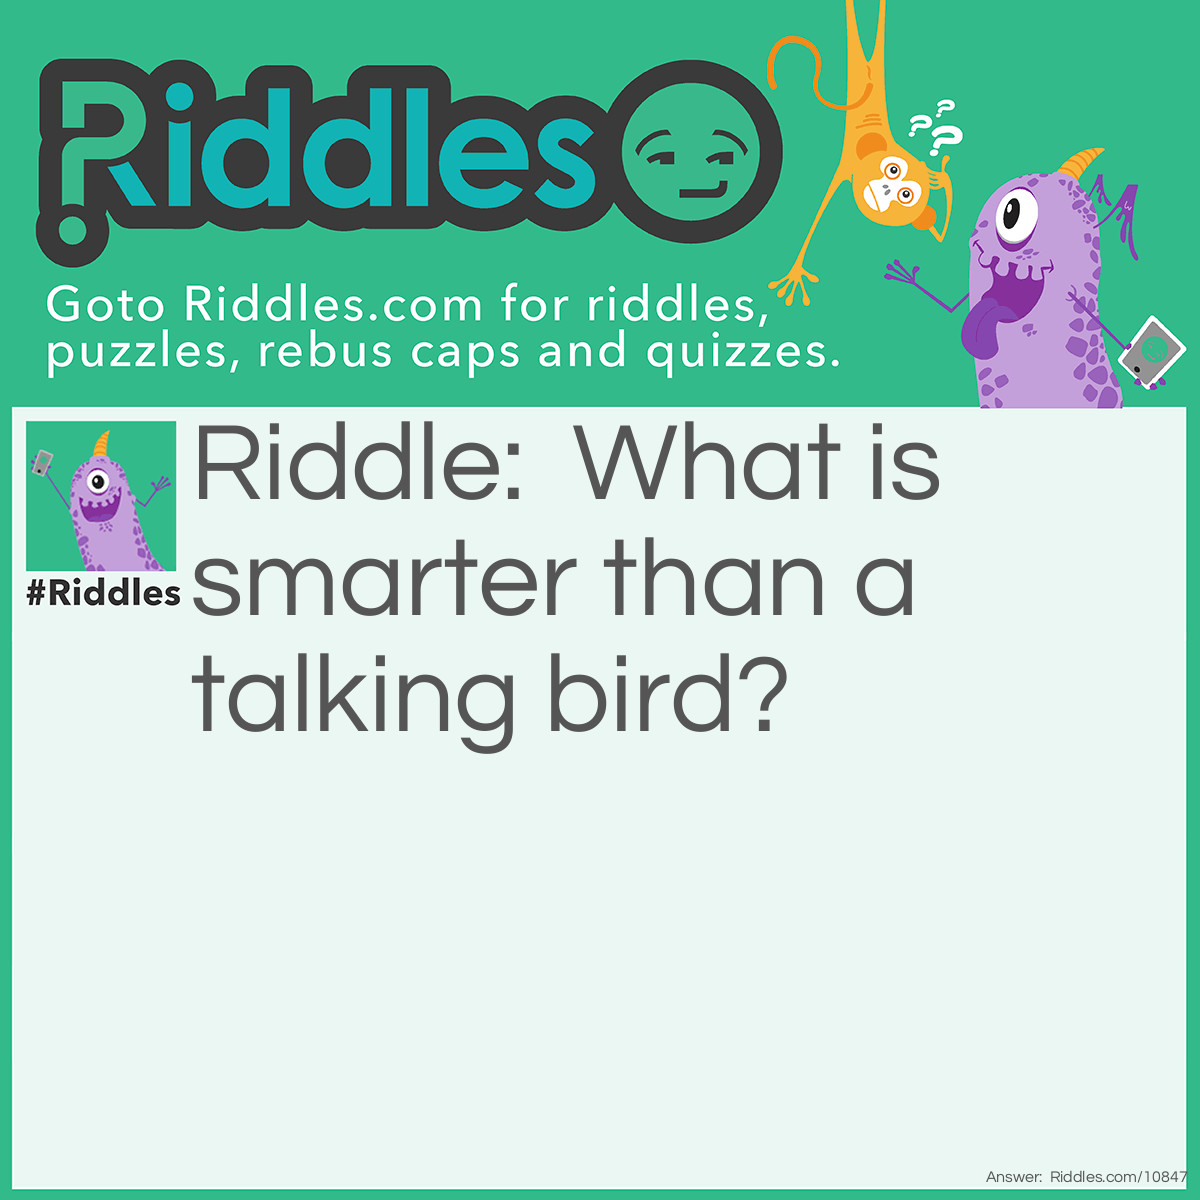 Riddle: What is smarter than a talking bird? Answer: A spelling bee.